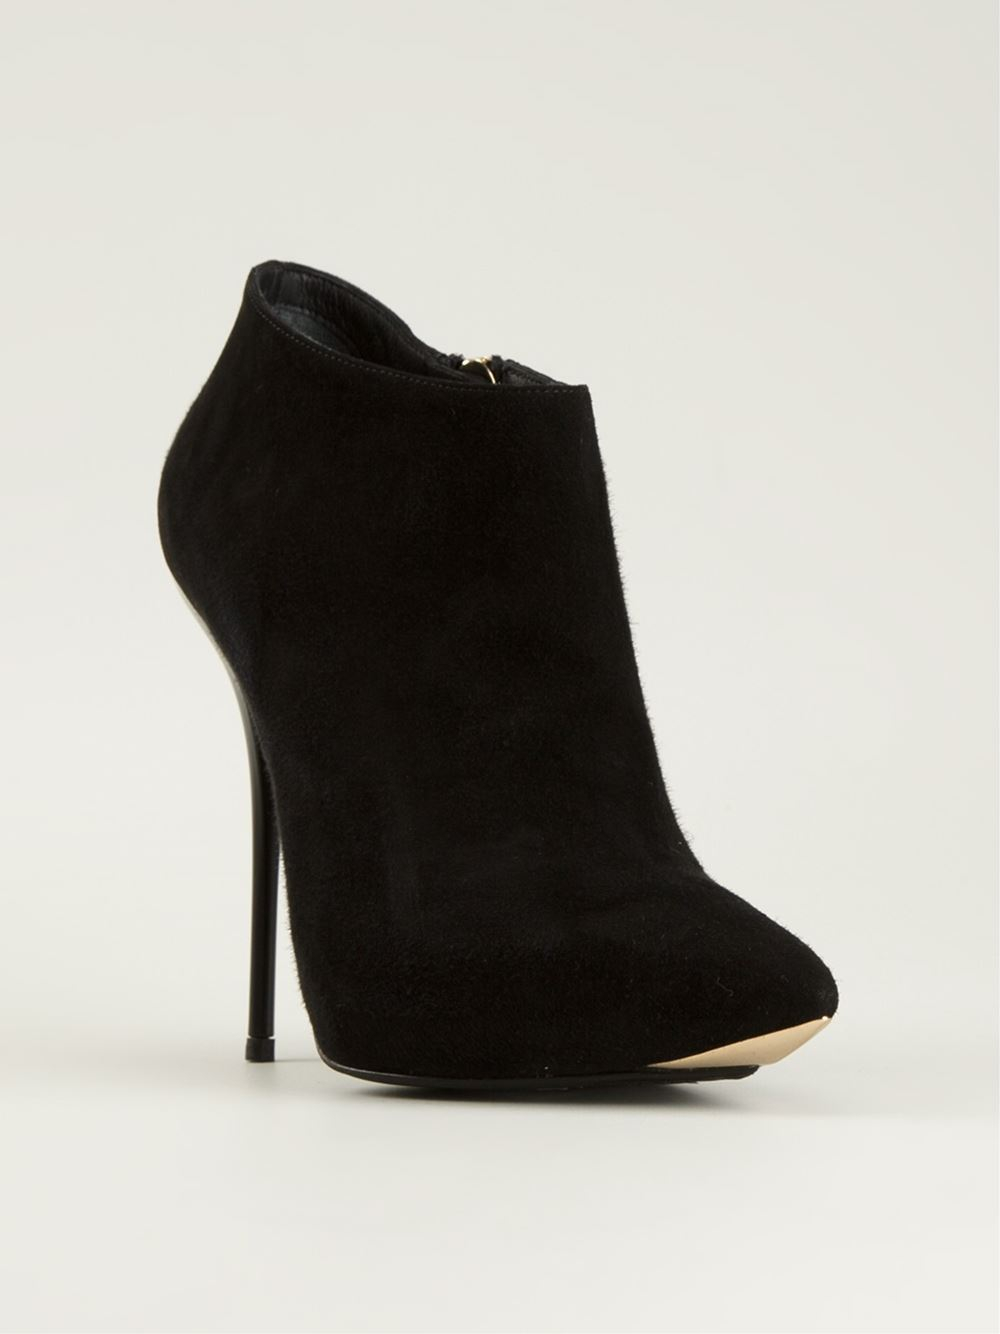 Lyst - Gianmarco lorenzi Pointed Toe Ankle Boots in Black